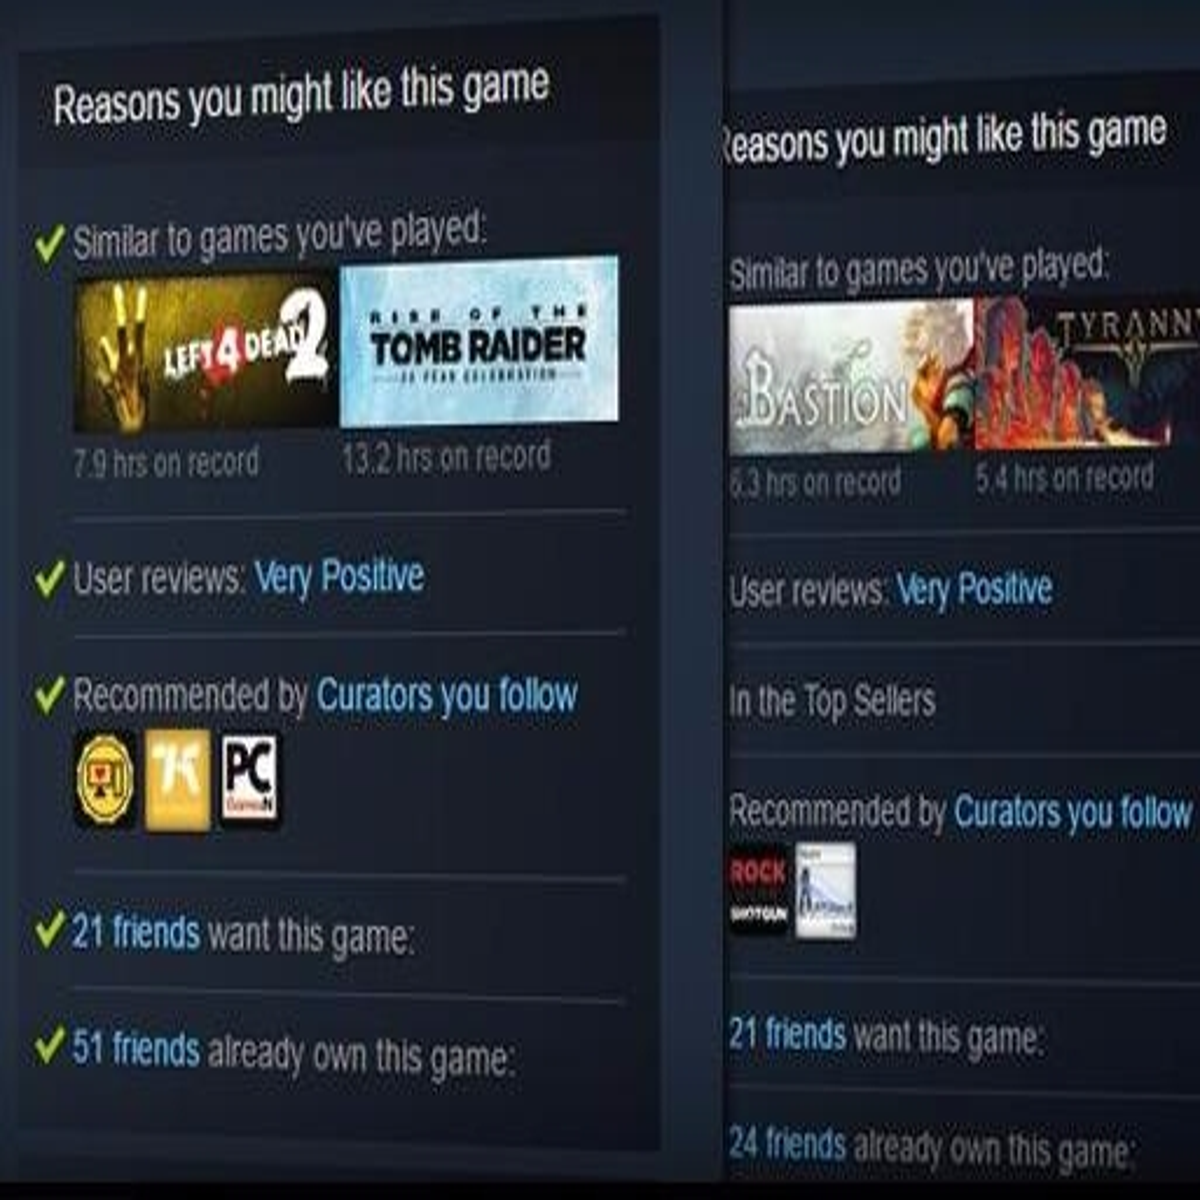 Steam Curator: The,Last,Of,Us